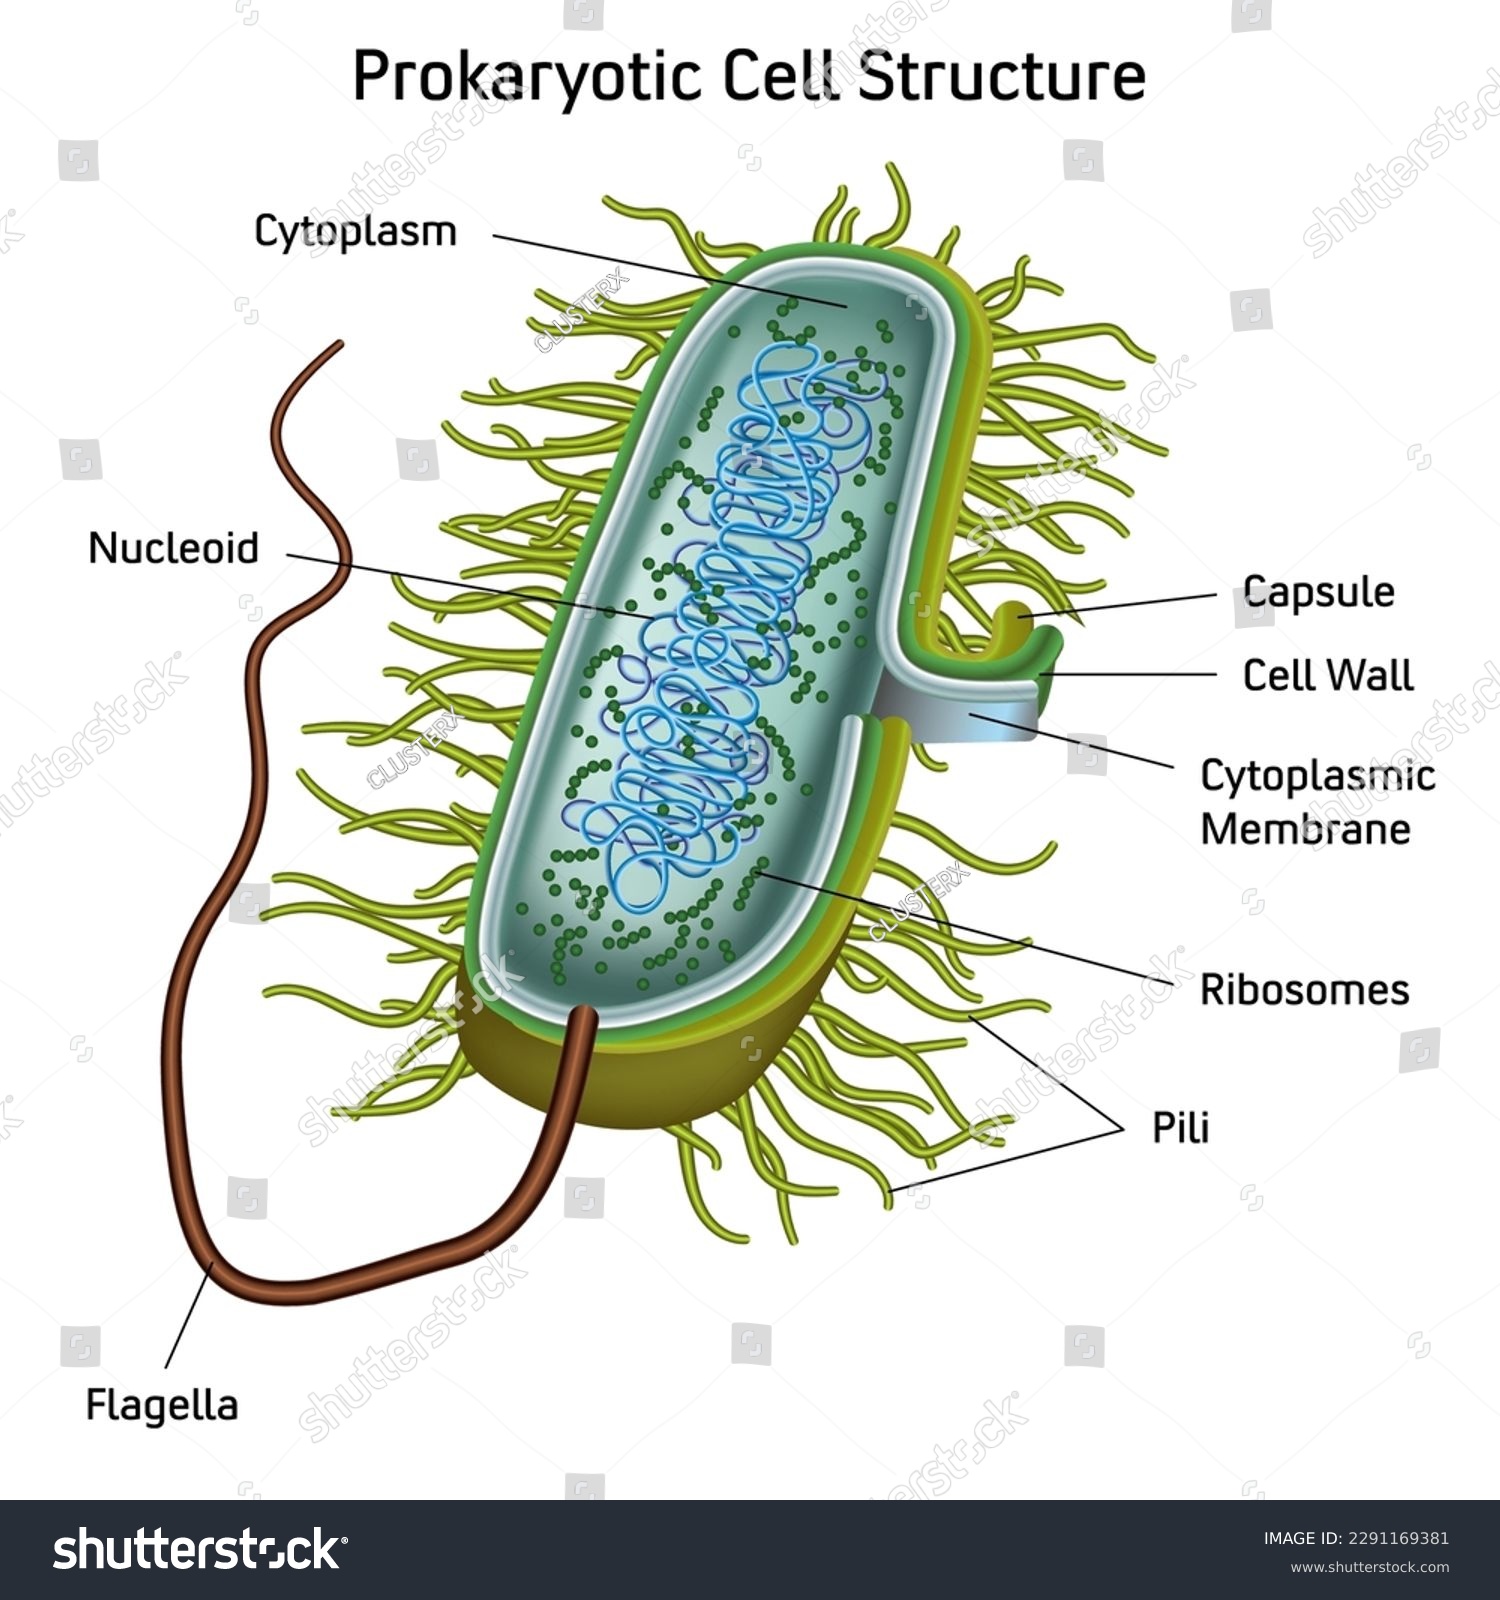 Prokaryotic Cell Structure Chart Vector Medical Royalty Free Stock Vector 2291169381 2322